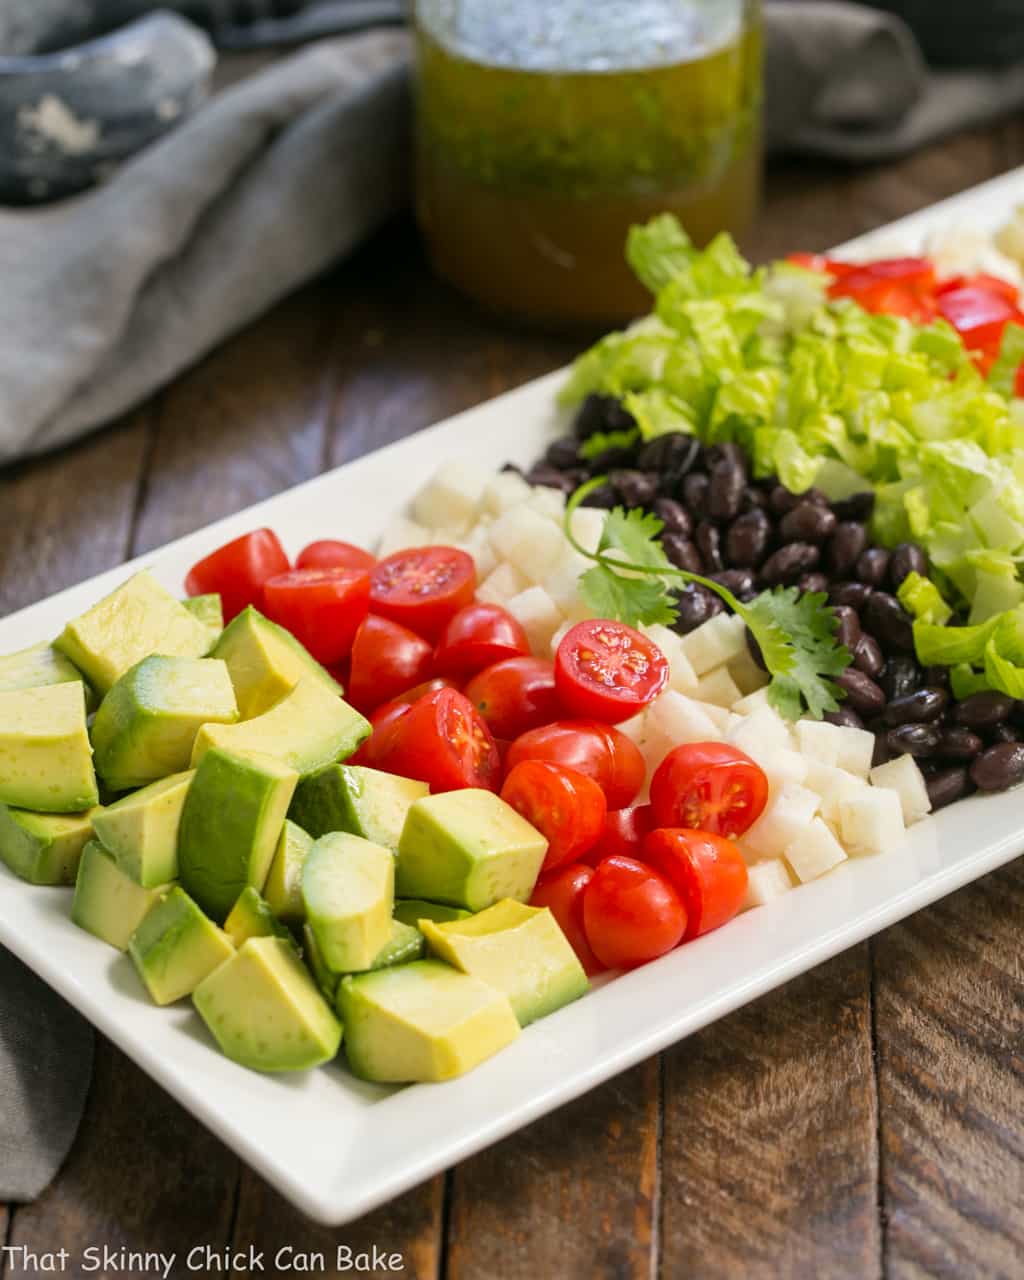 Mexican Chopped Salad with Cilantro Vinaigrette ingredients on a white ceramic tray.